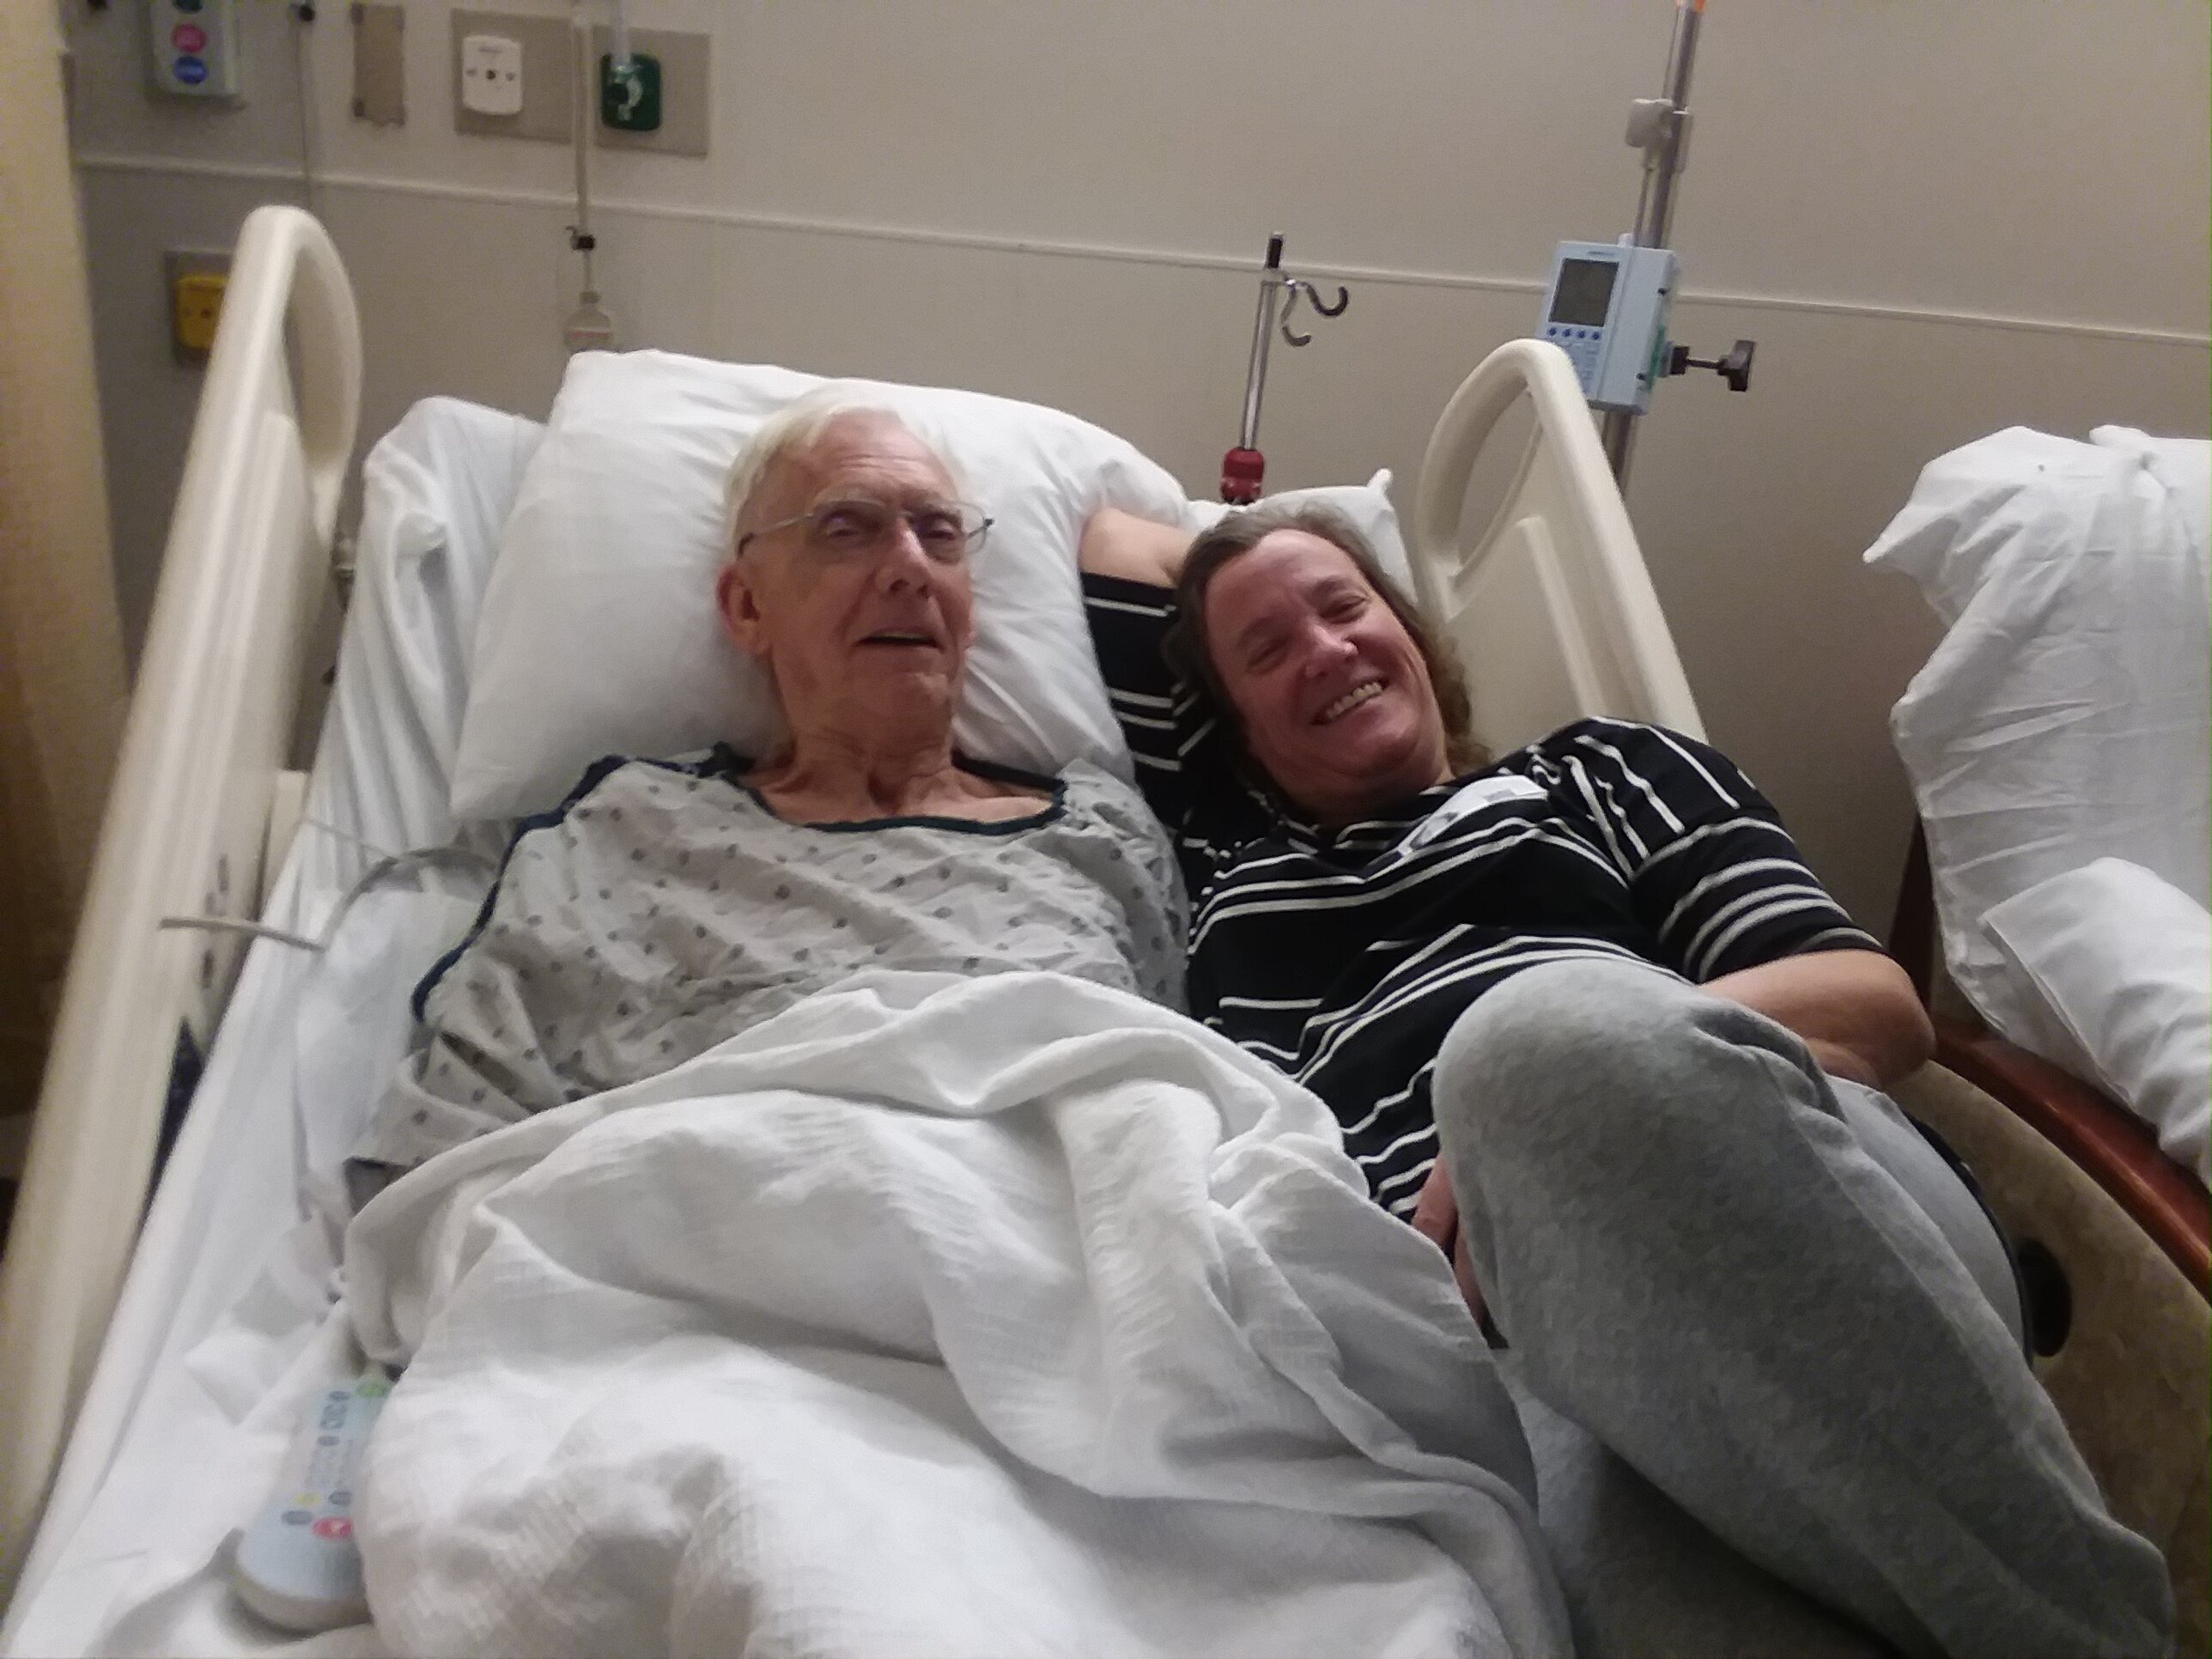 Darcy Thiel, right, lays in a hospital bed with her father, David Thiel during one of his hospitalizations before his death in 2018 of complications from Parkinson's disease.